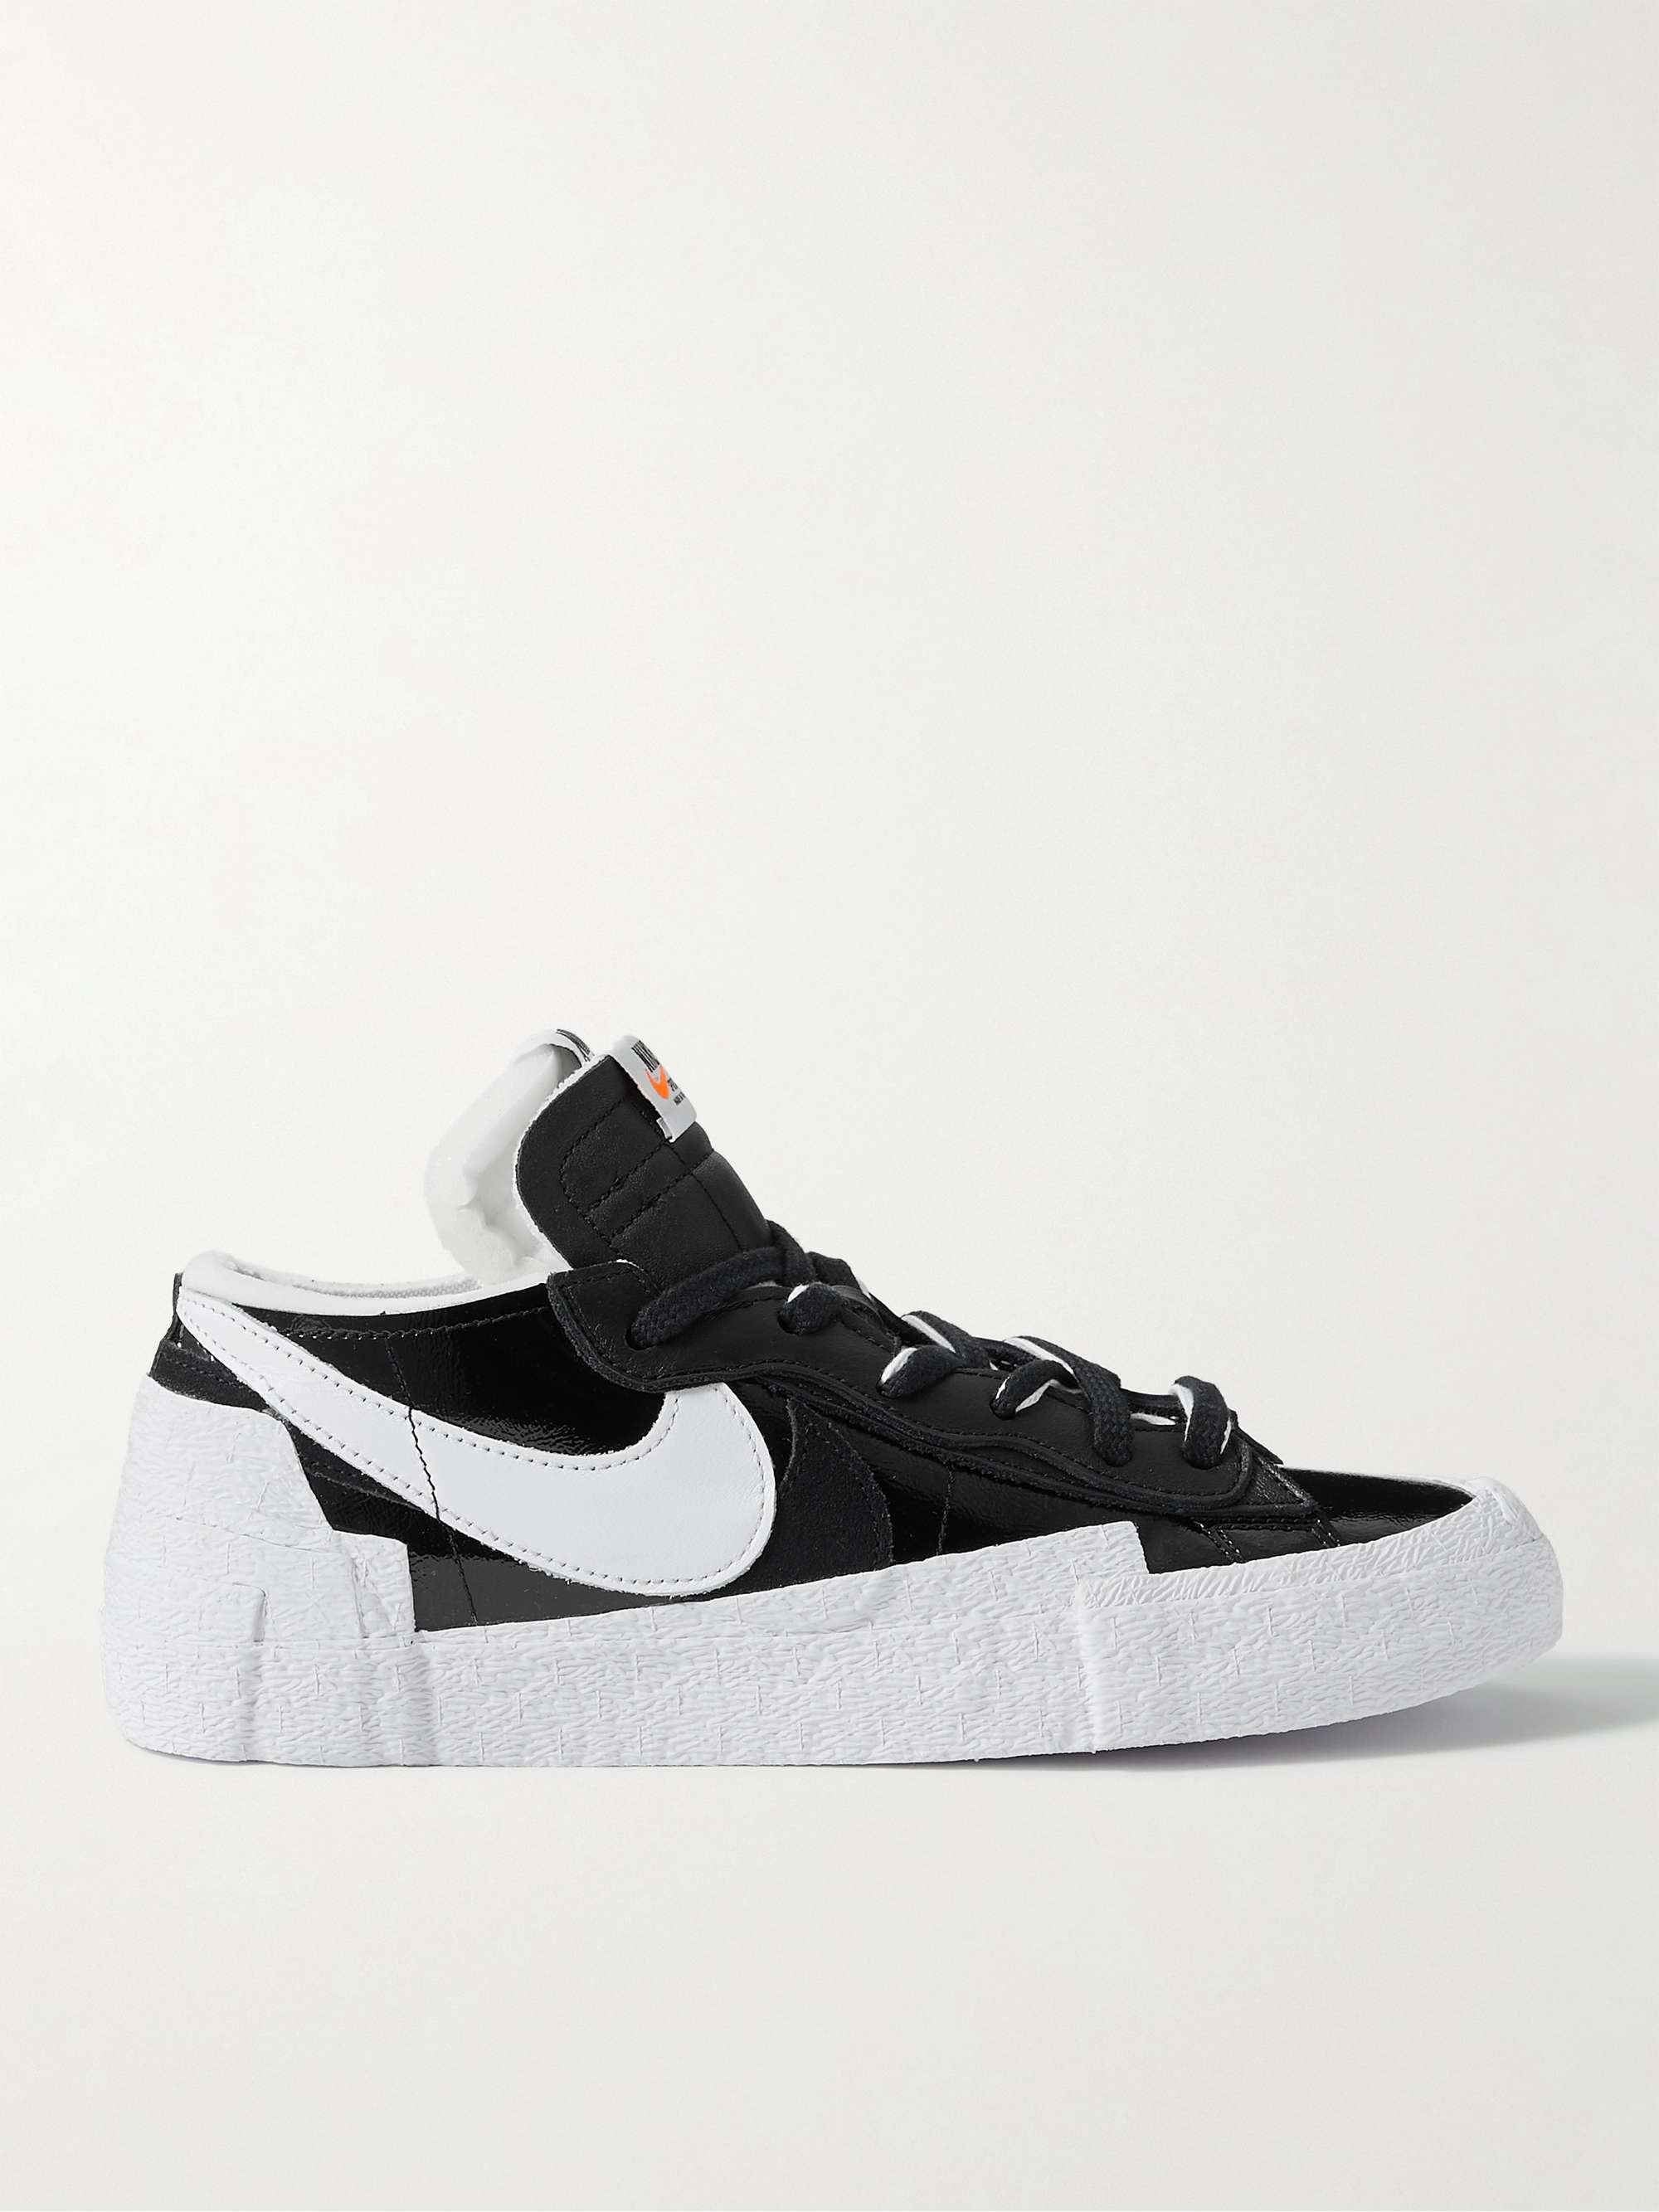 NIKE + Sacai Blazer Low Suede-Trimmed Leather Sneakers for Men | MR PORTER